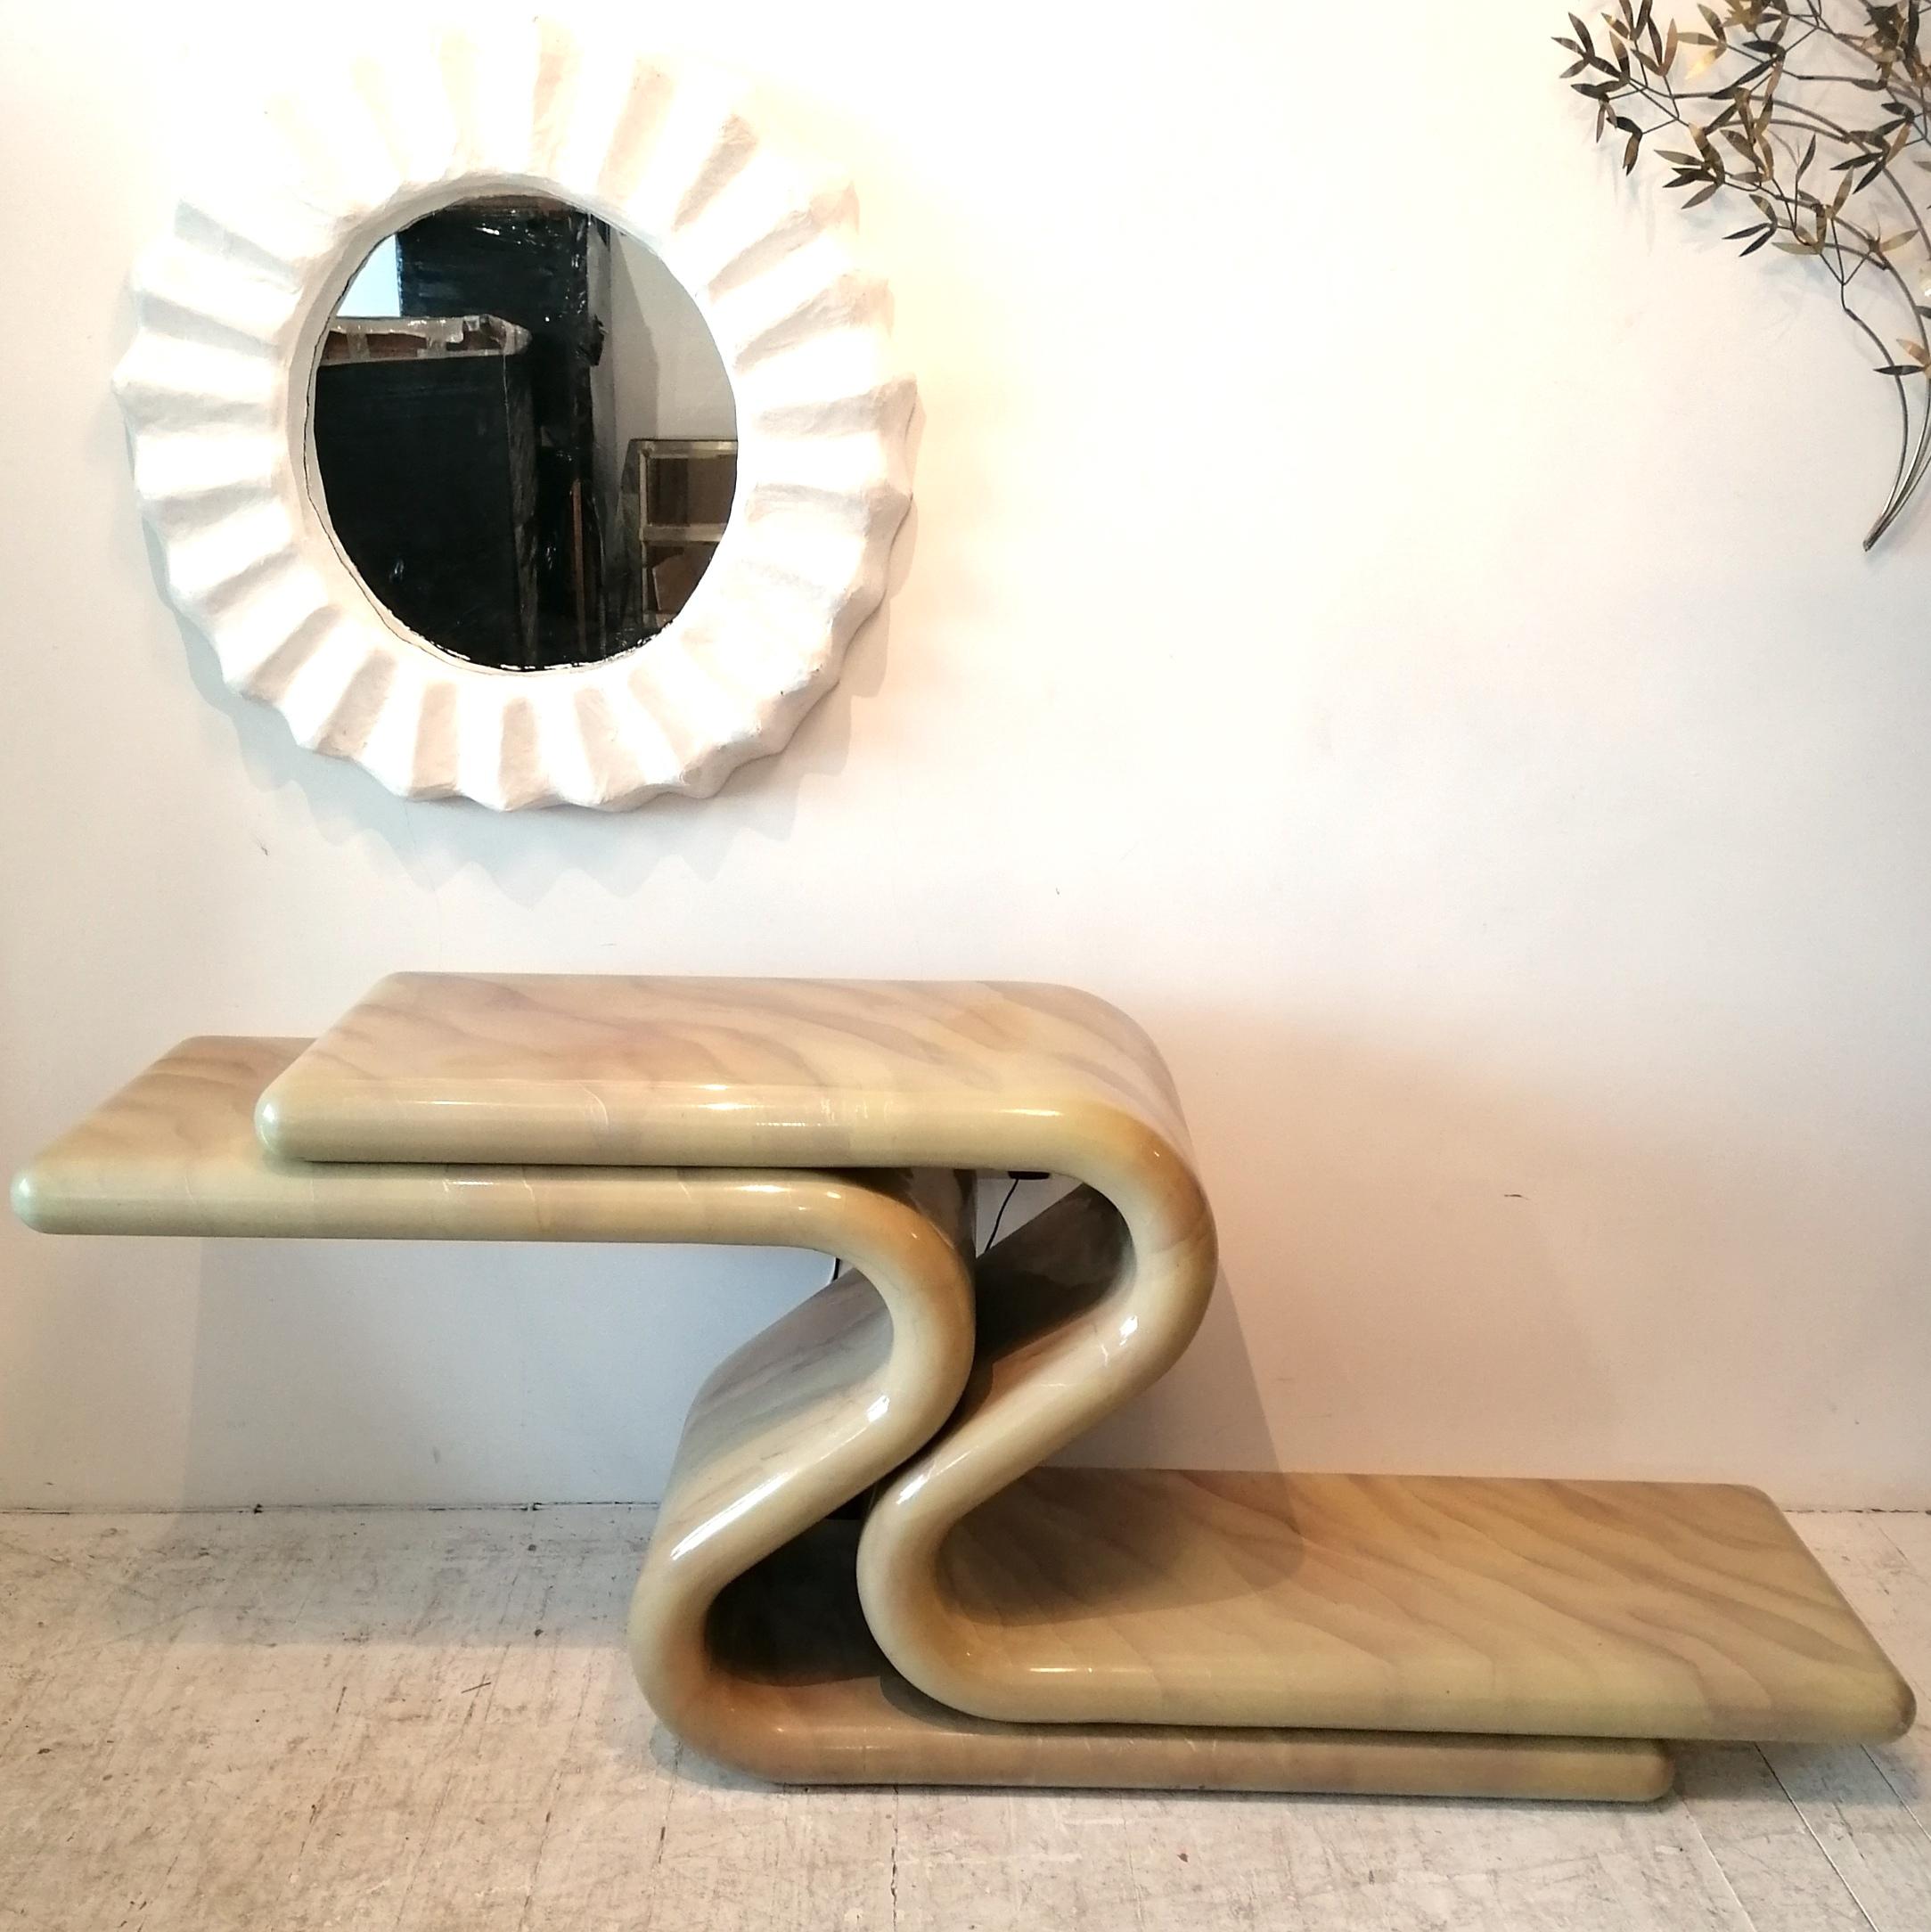 Incredible sinuous postmodern lacquered console table, Karl Springer / Jay Spectre style, 1980s American. It's deep cream, with subtle pinky mauve & silver marbling.
Condition is good, just a few little scrapes at corners, and small dings here and